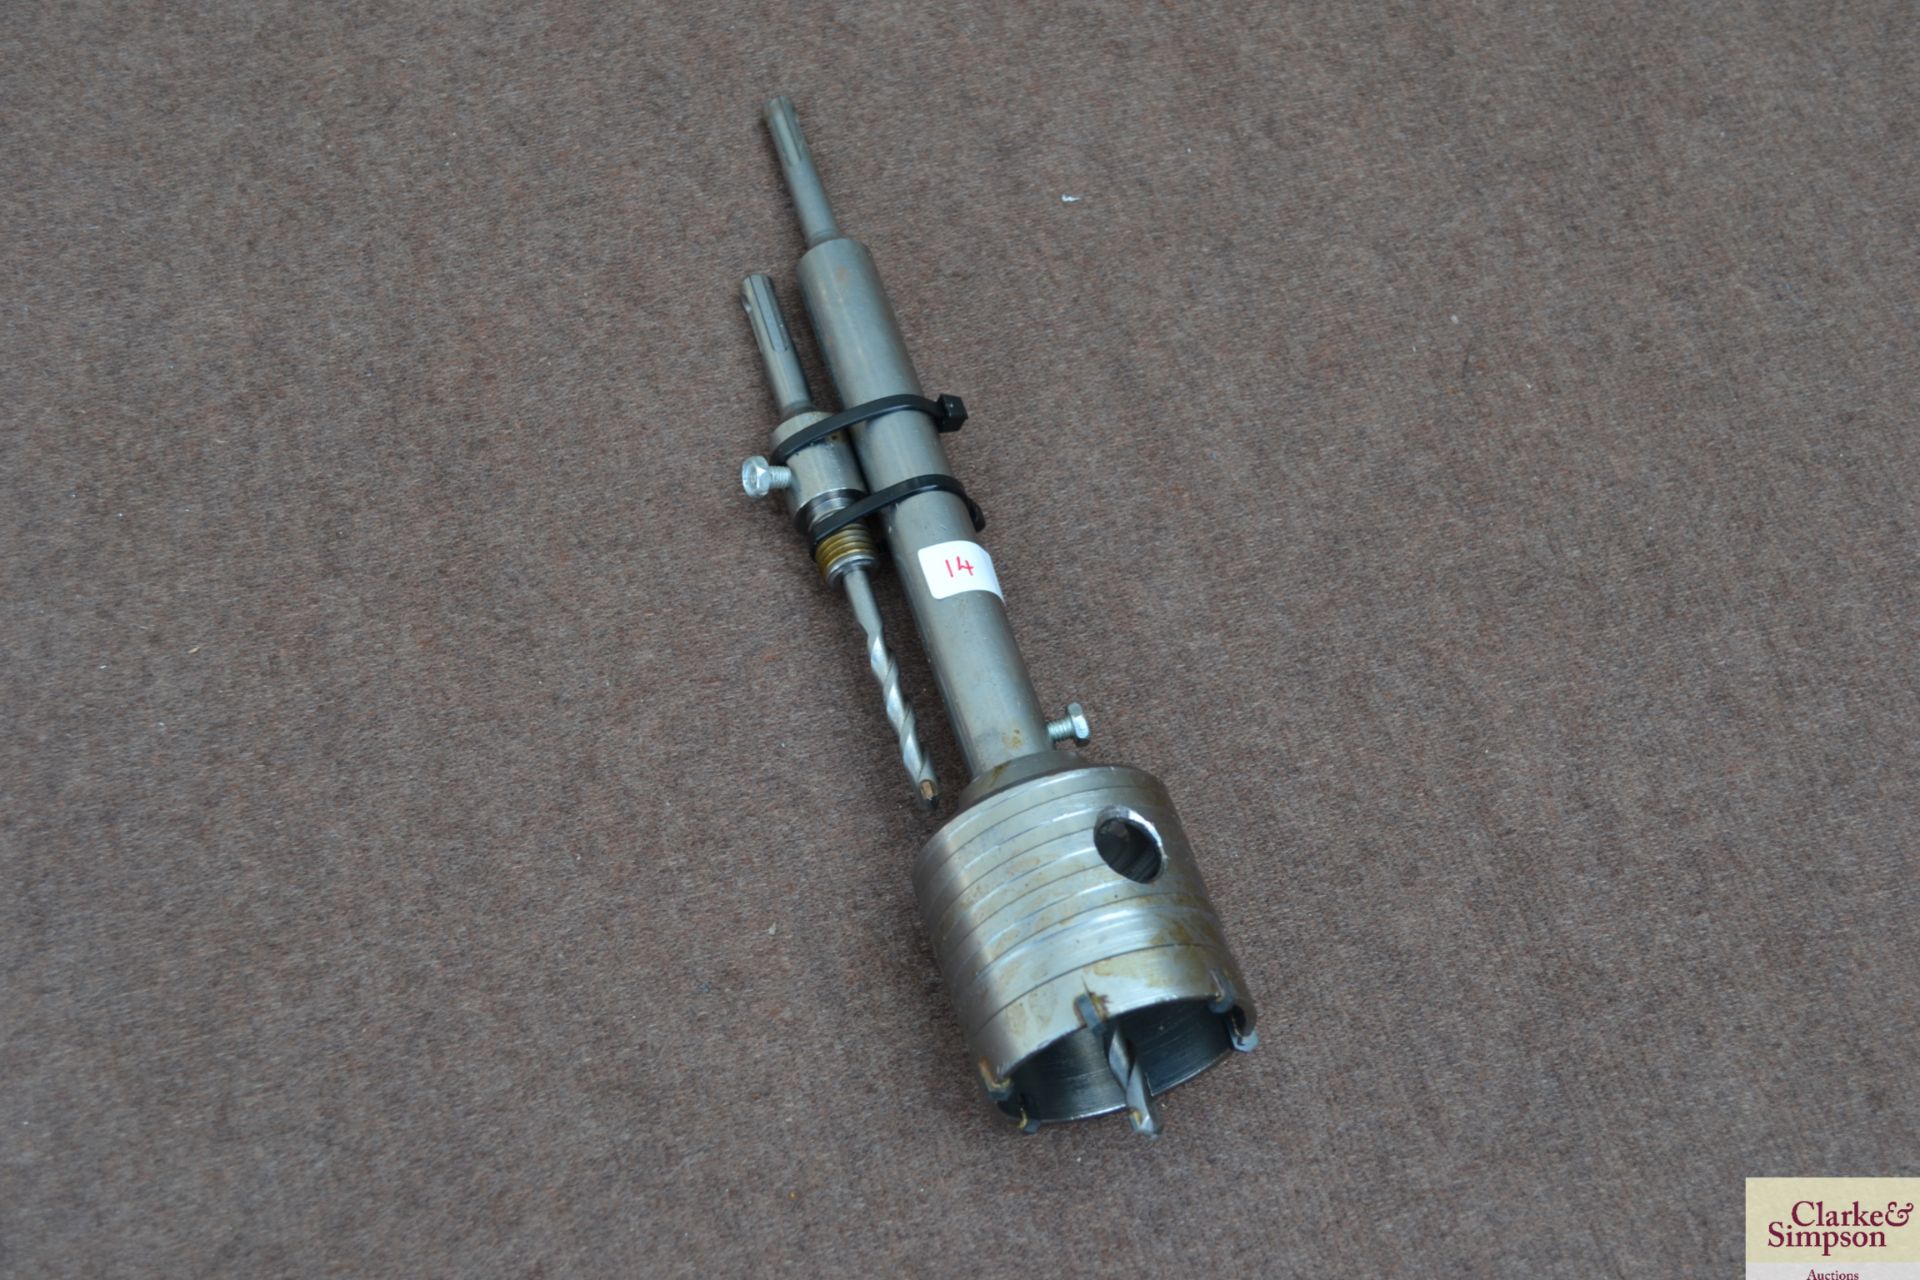 50mm core drill & extension. V